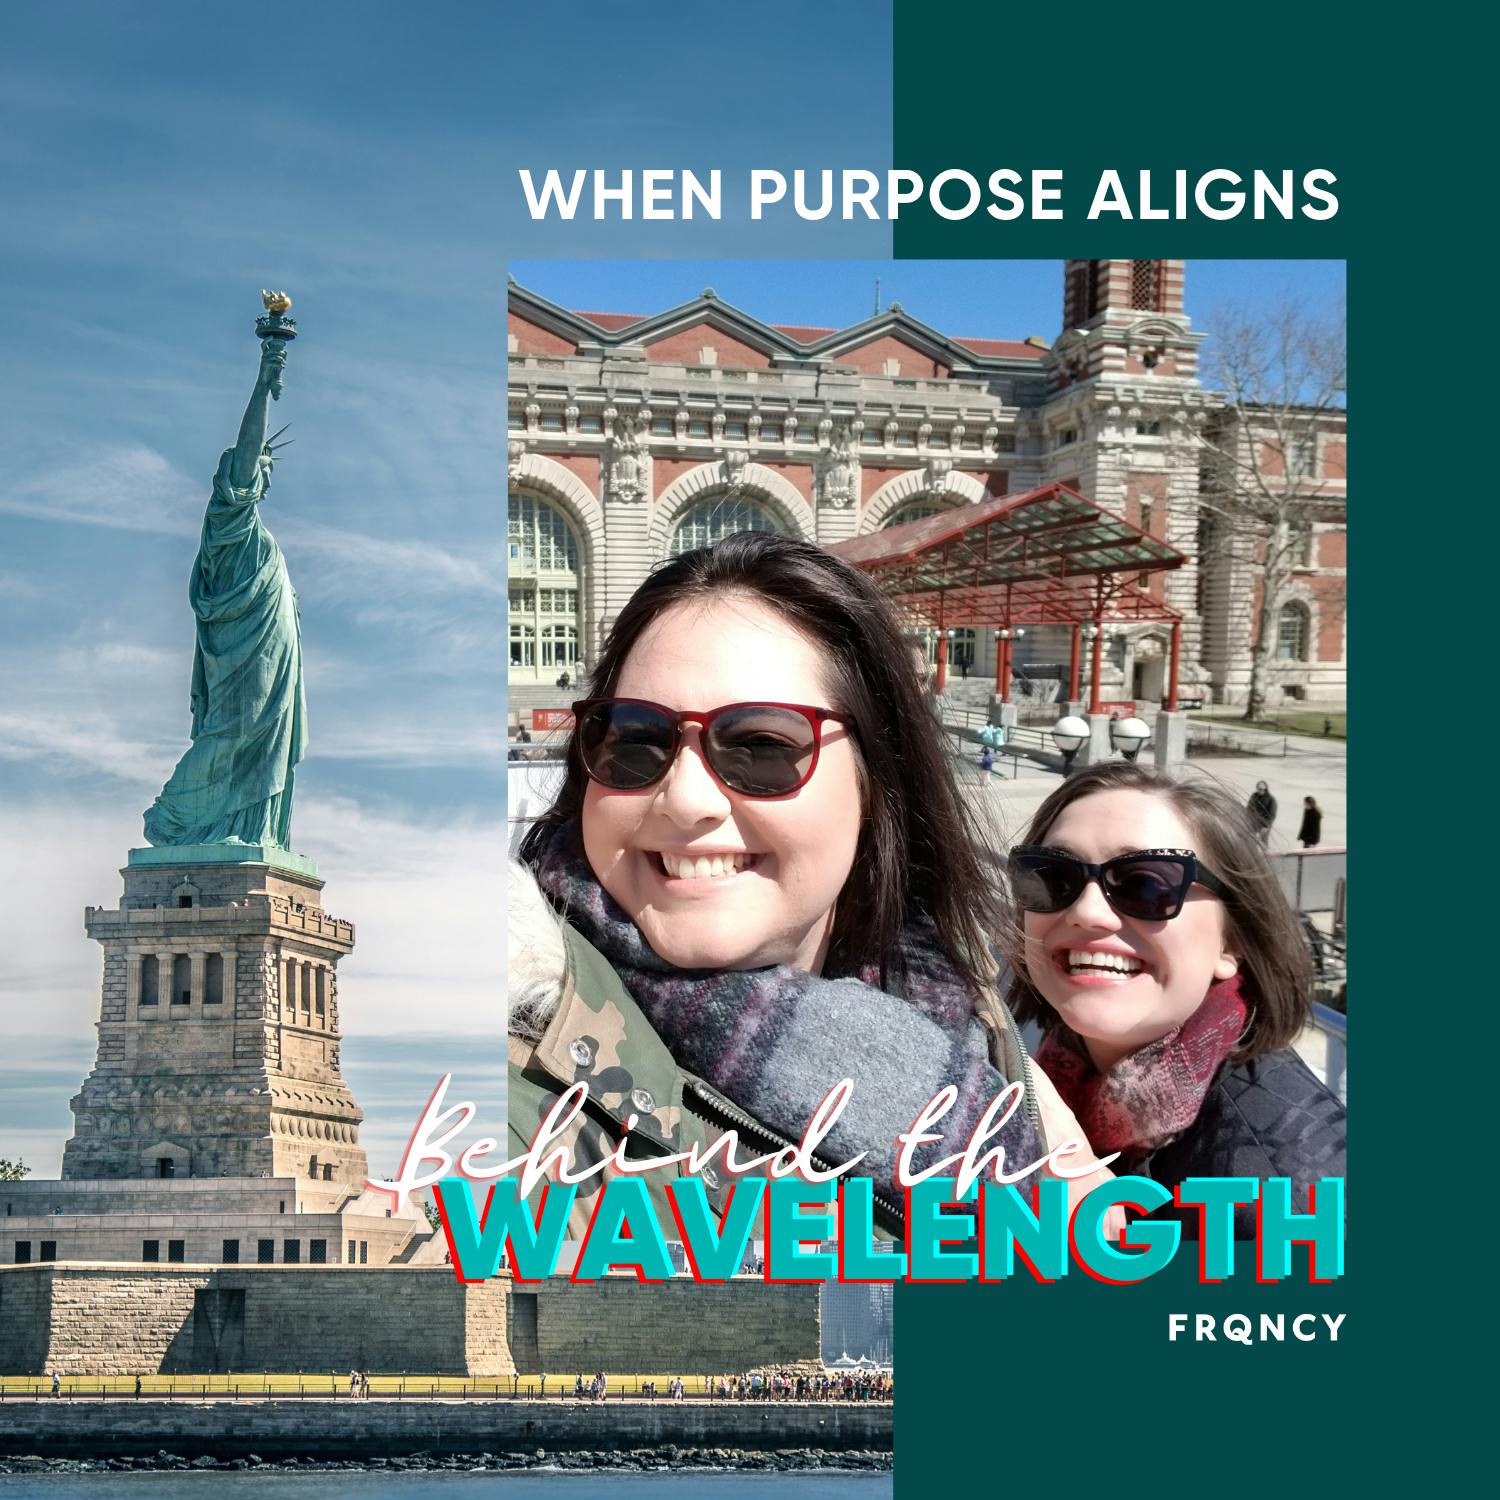 Behind the Wavelength: When Purpose Aligns